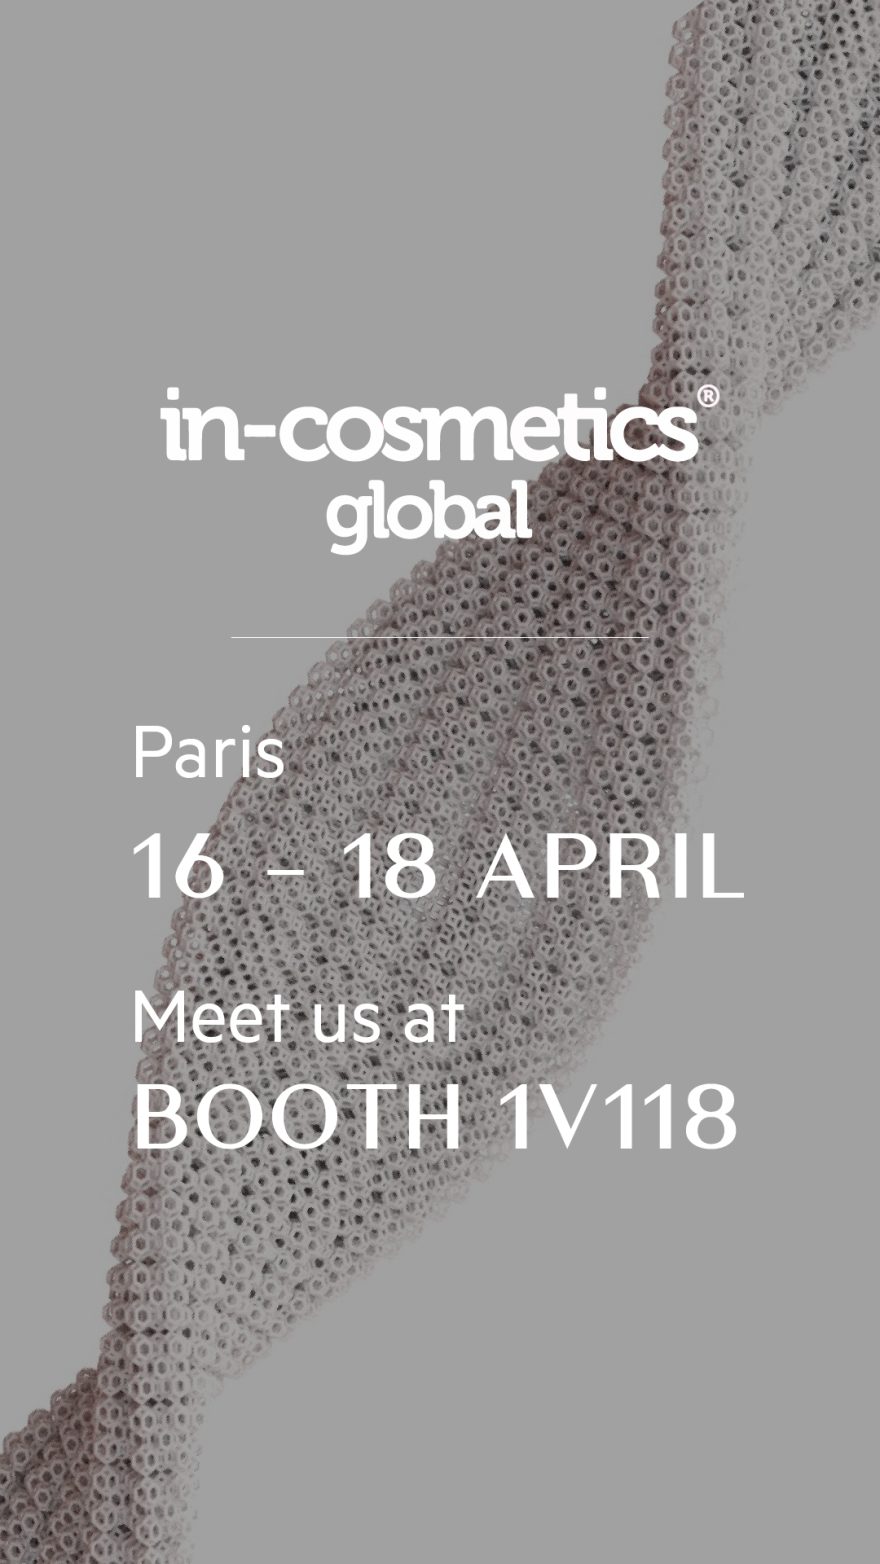 SAES Getters | incosmetics-global-paris_mobile-13